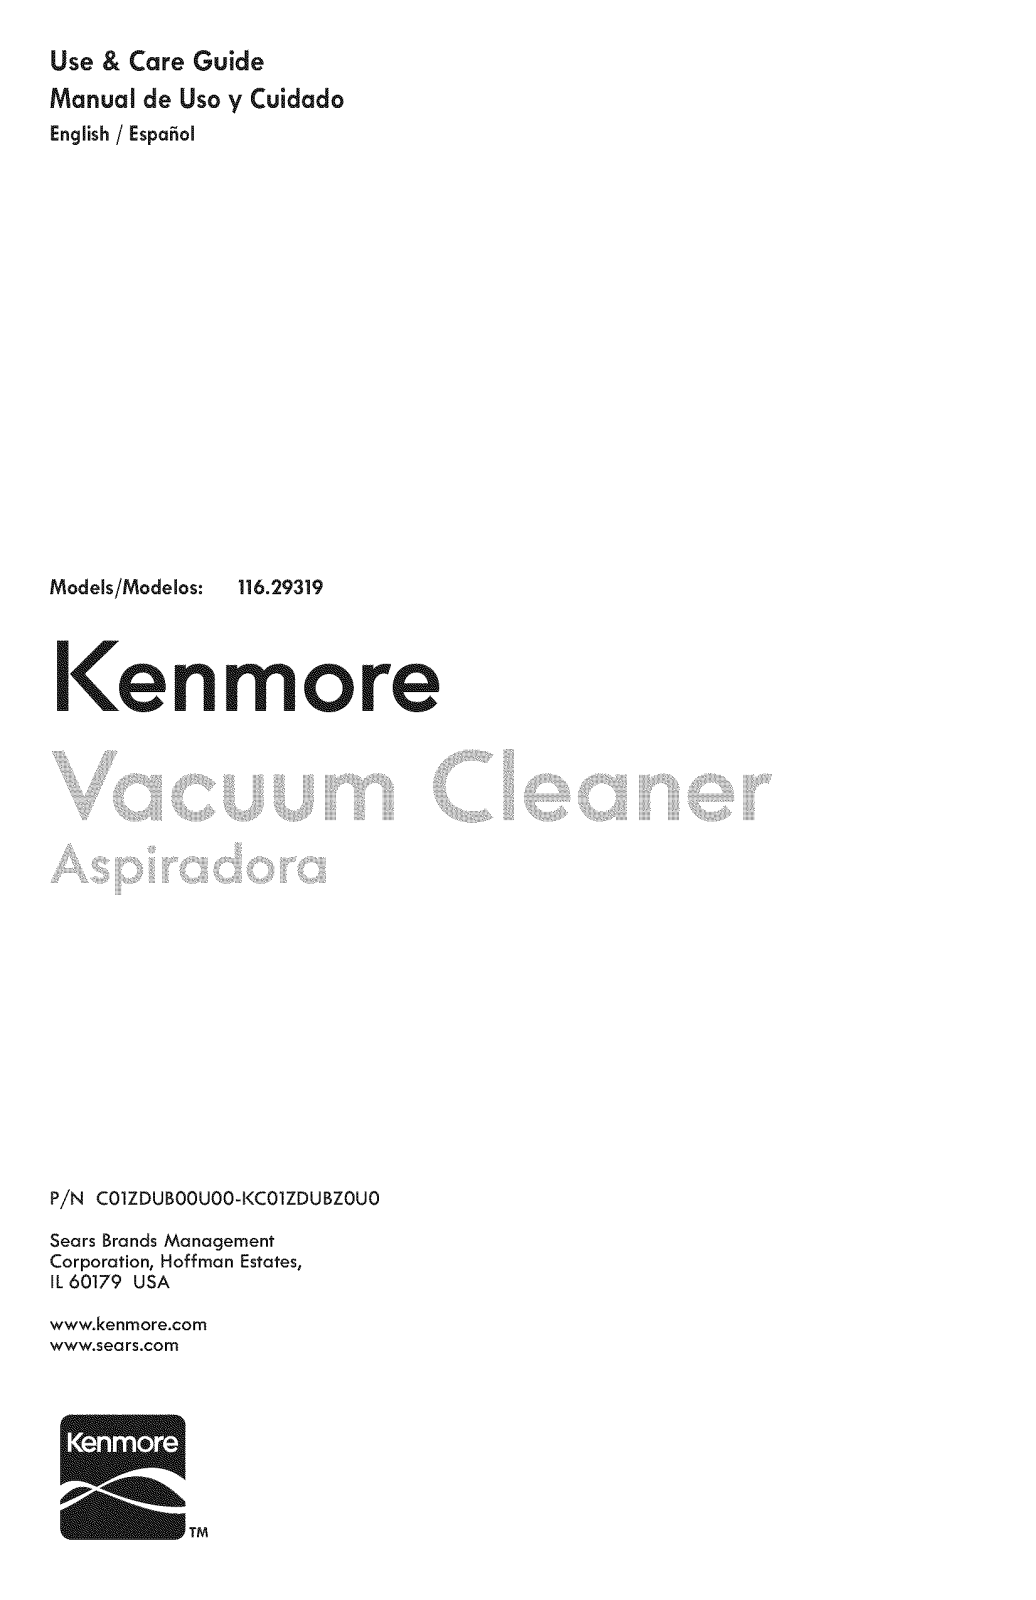 Kenmore Canister Vacuum Cleaner, 29319 Owner's Manual